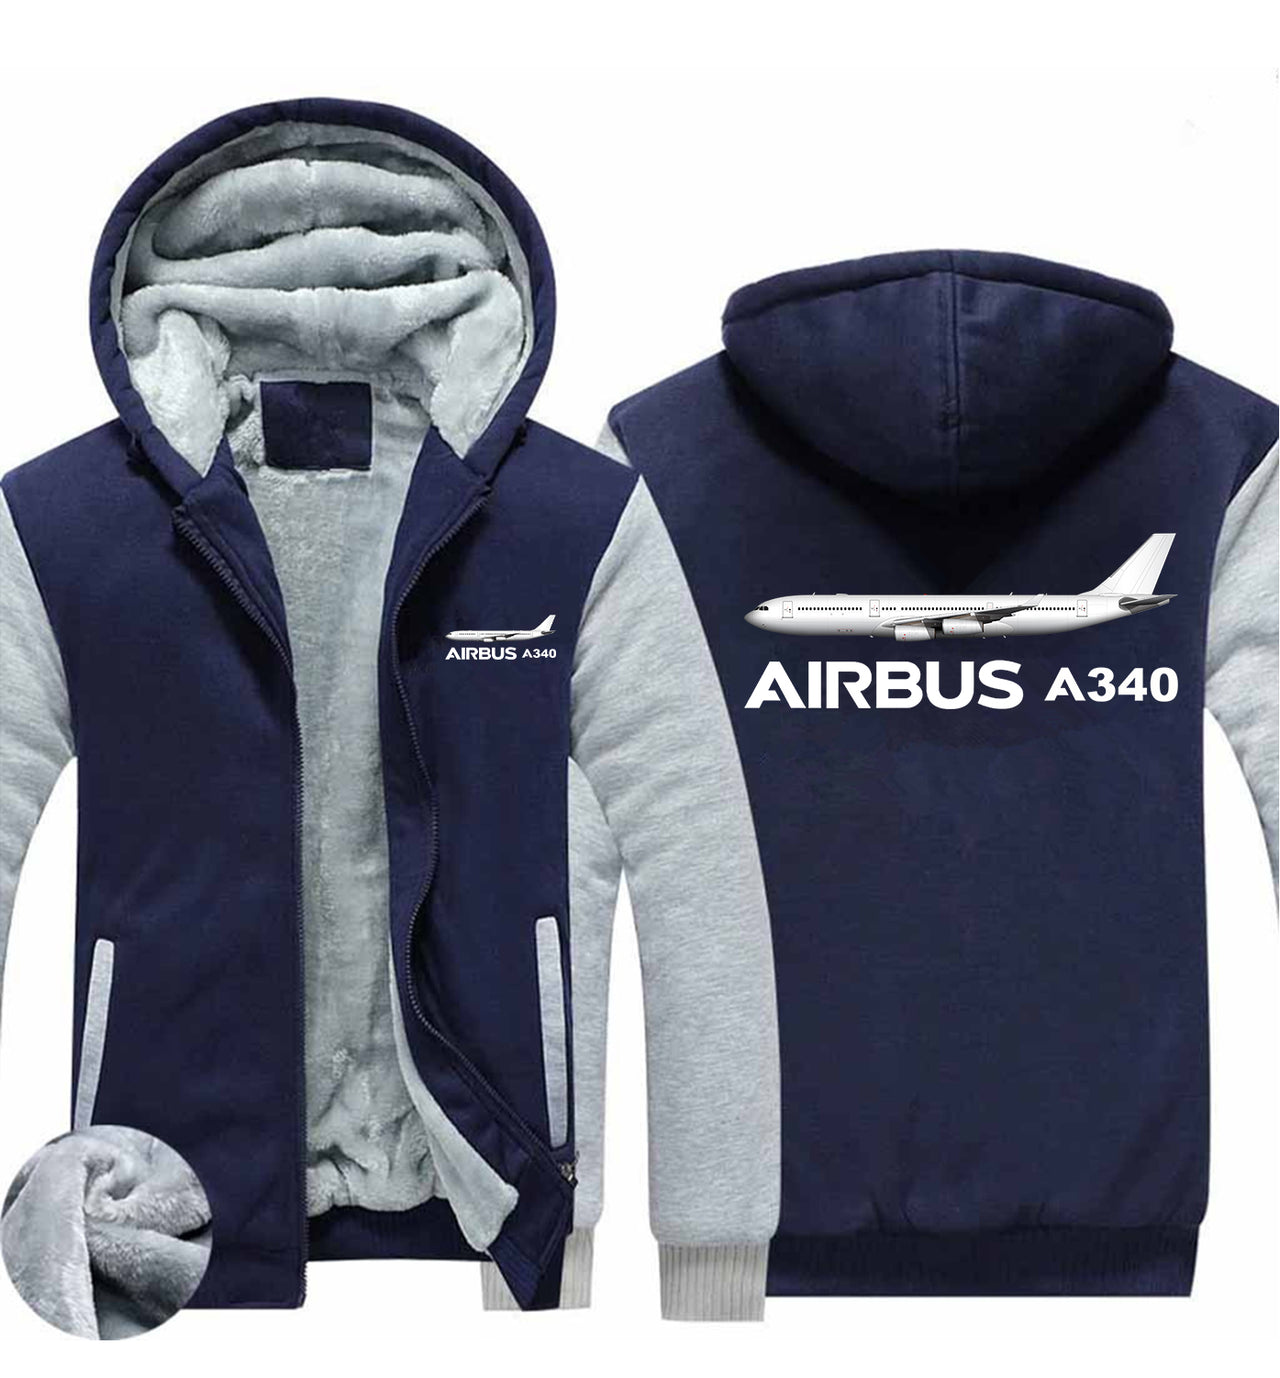 The Airbus A340 Designed Zipped Sweatshirts